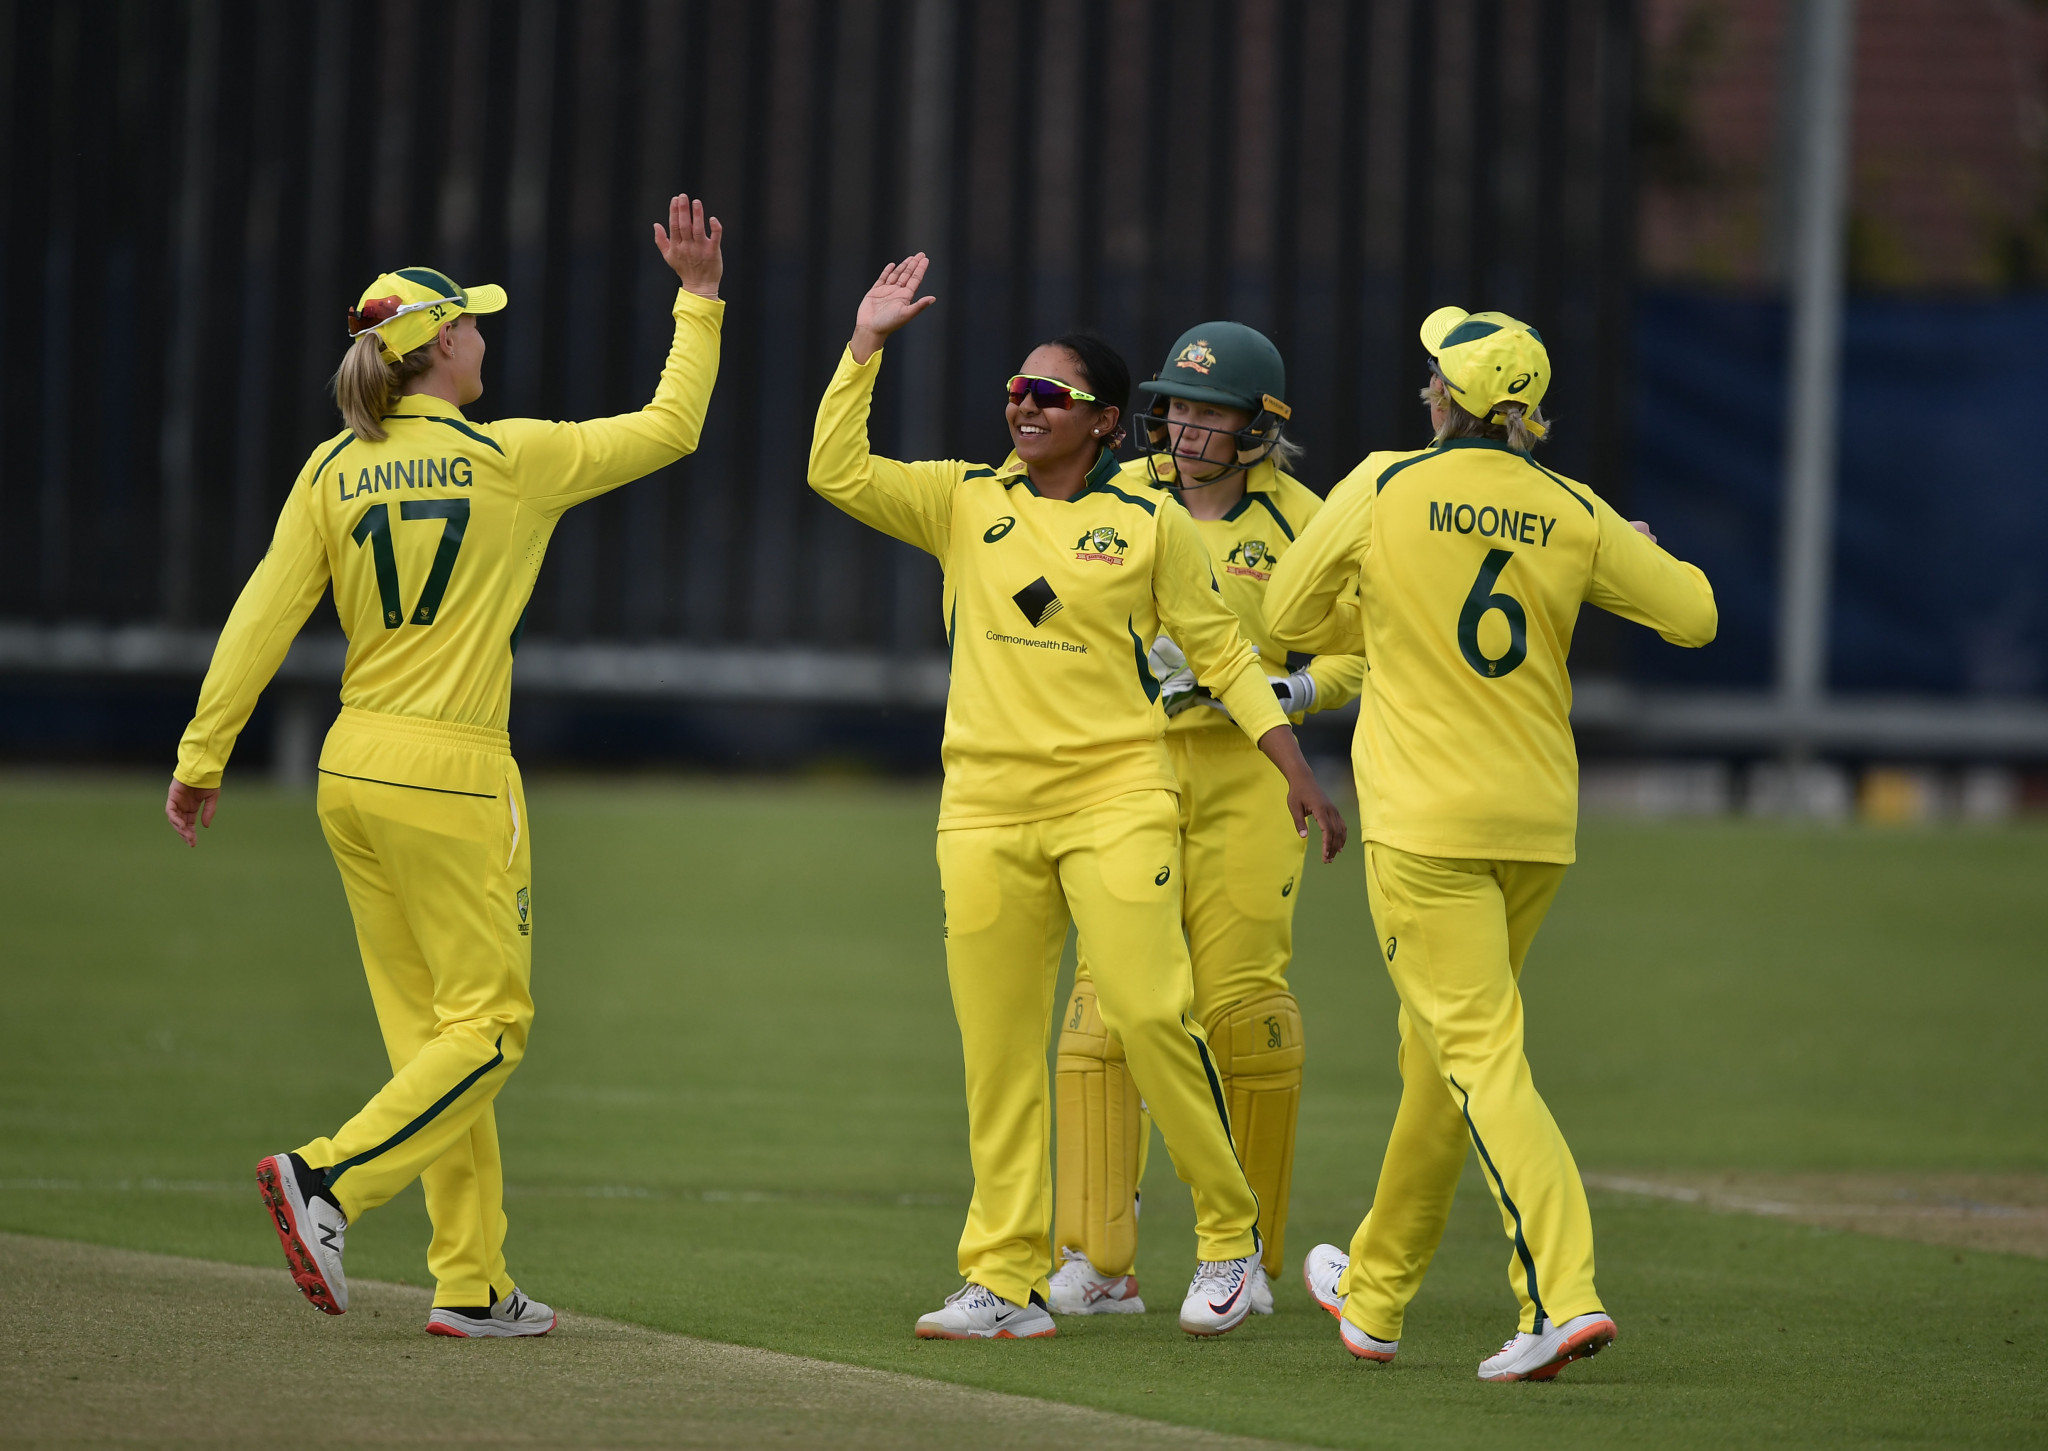 ICC predicts women's T20 cricket will be star attraction at Birmingham 2022